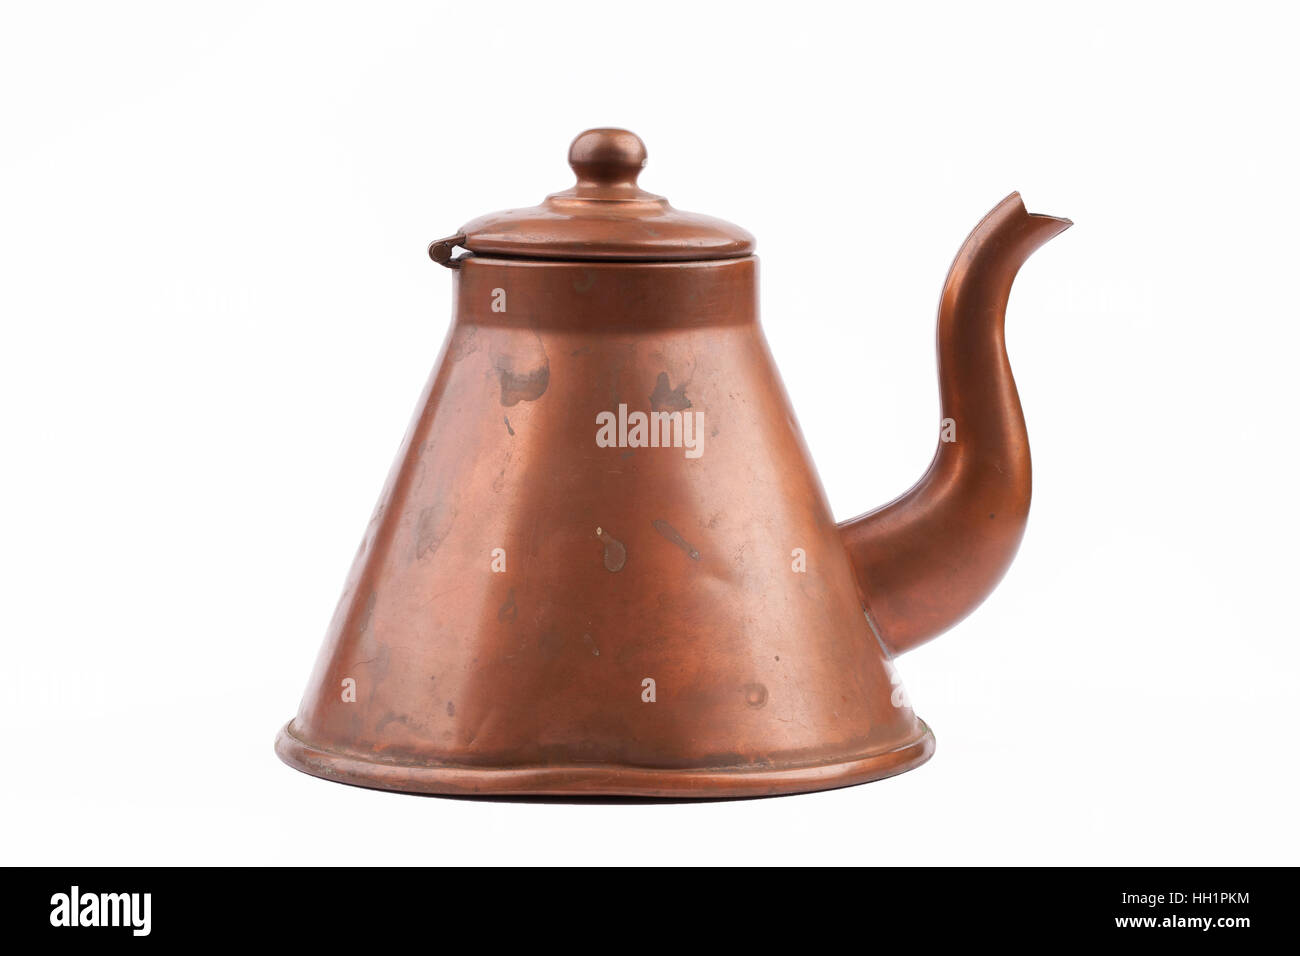 https://c8.alamy.com/comp/HH1PKM/antique-old-copper-tea-kettle-isolated-on-white-background-HH1PKM.jpg